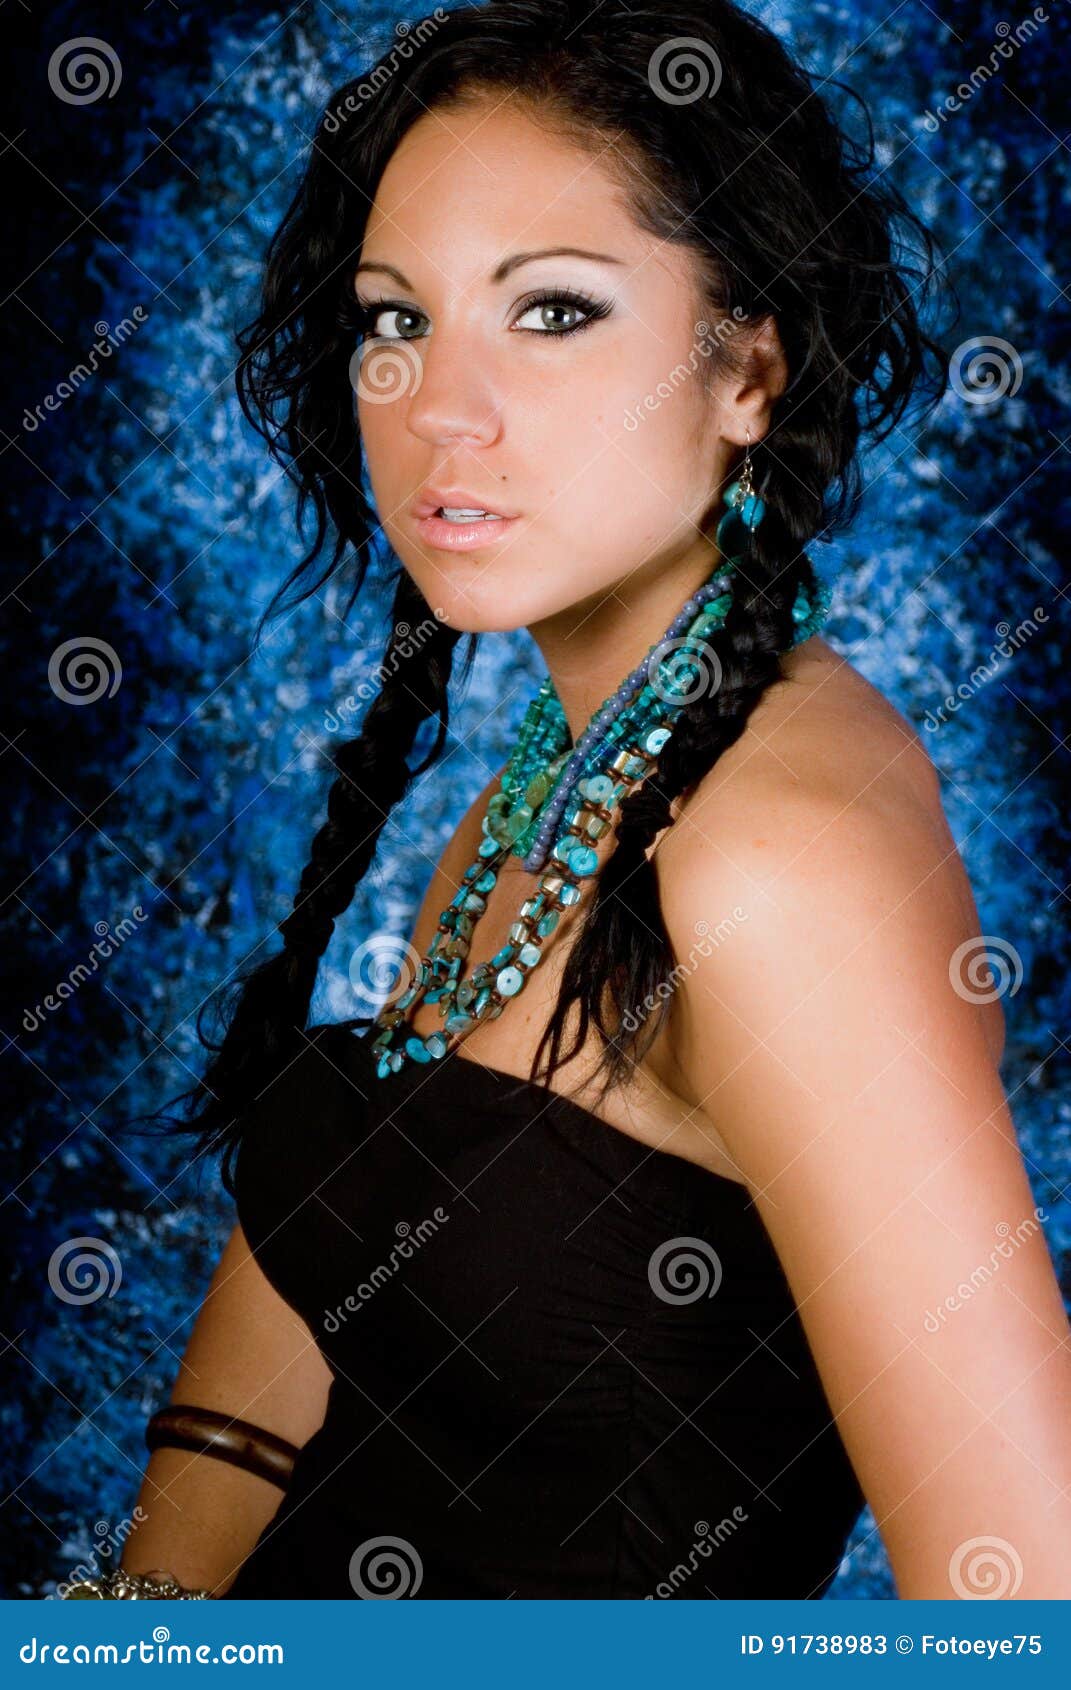 Girl Native American Indian Woman With Braids Stock Image Hot Sex Picture